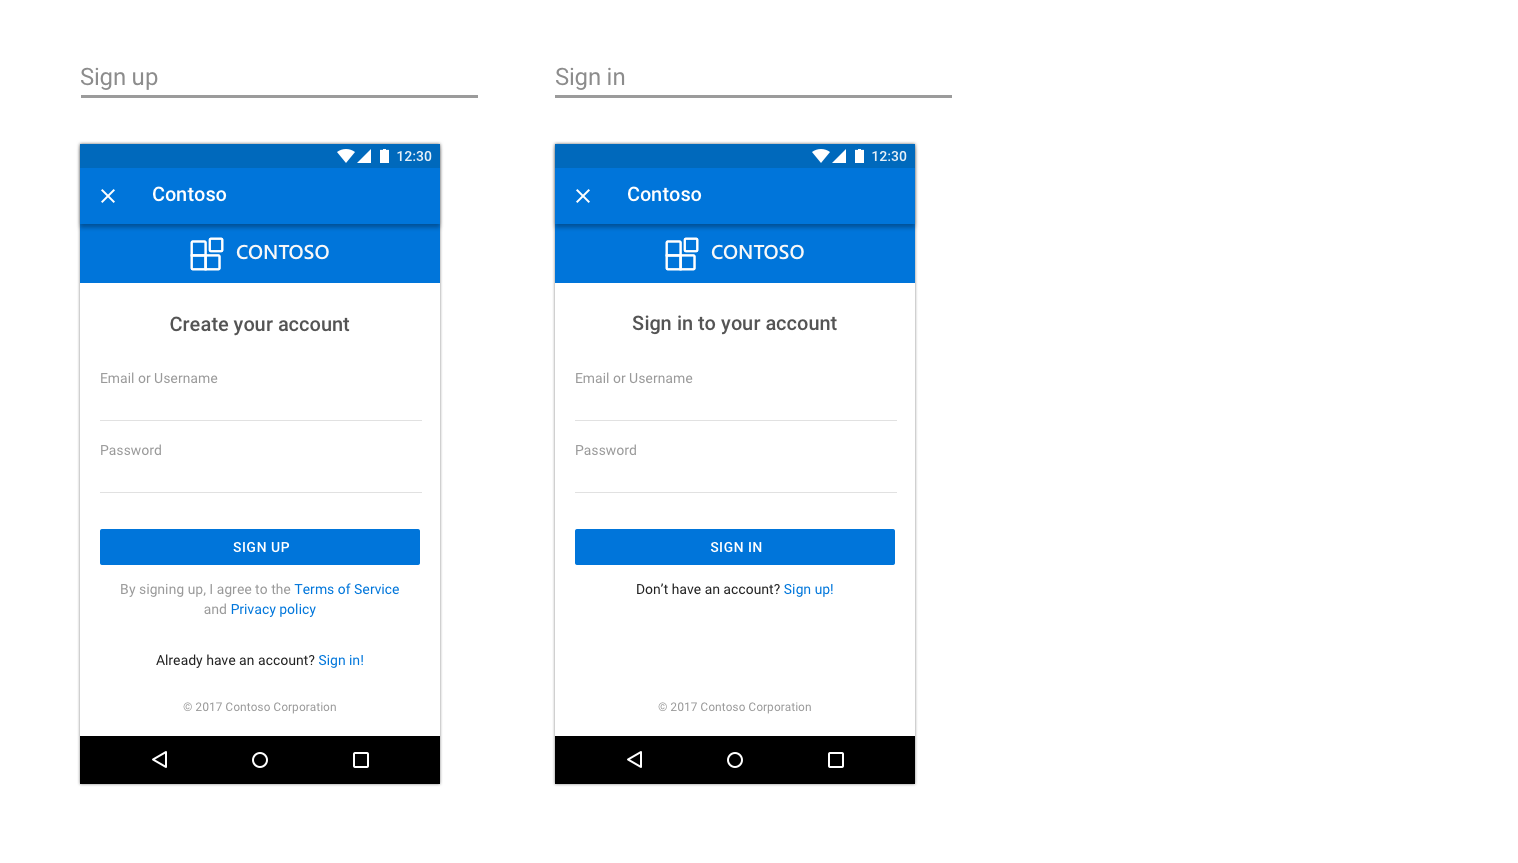 Examples of page to sign in on Android.